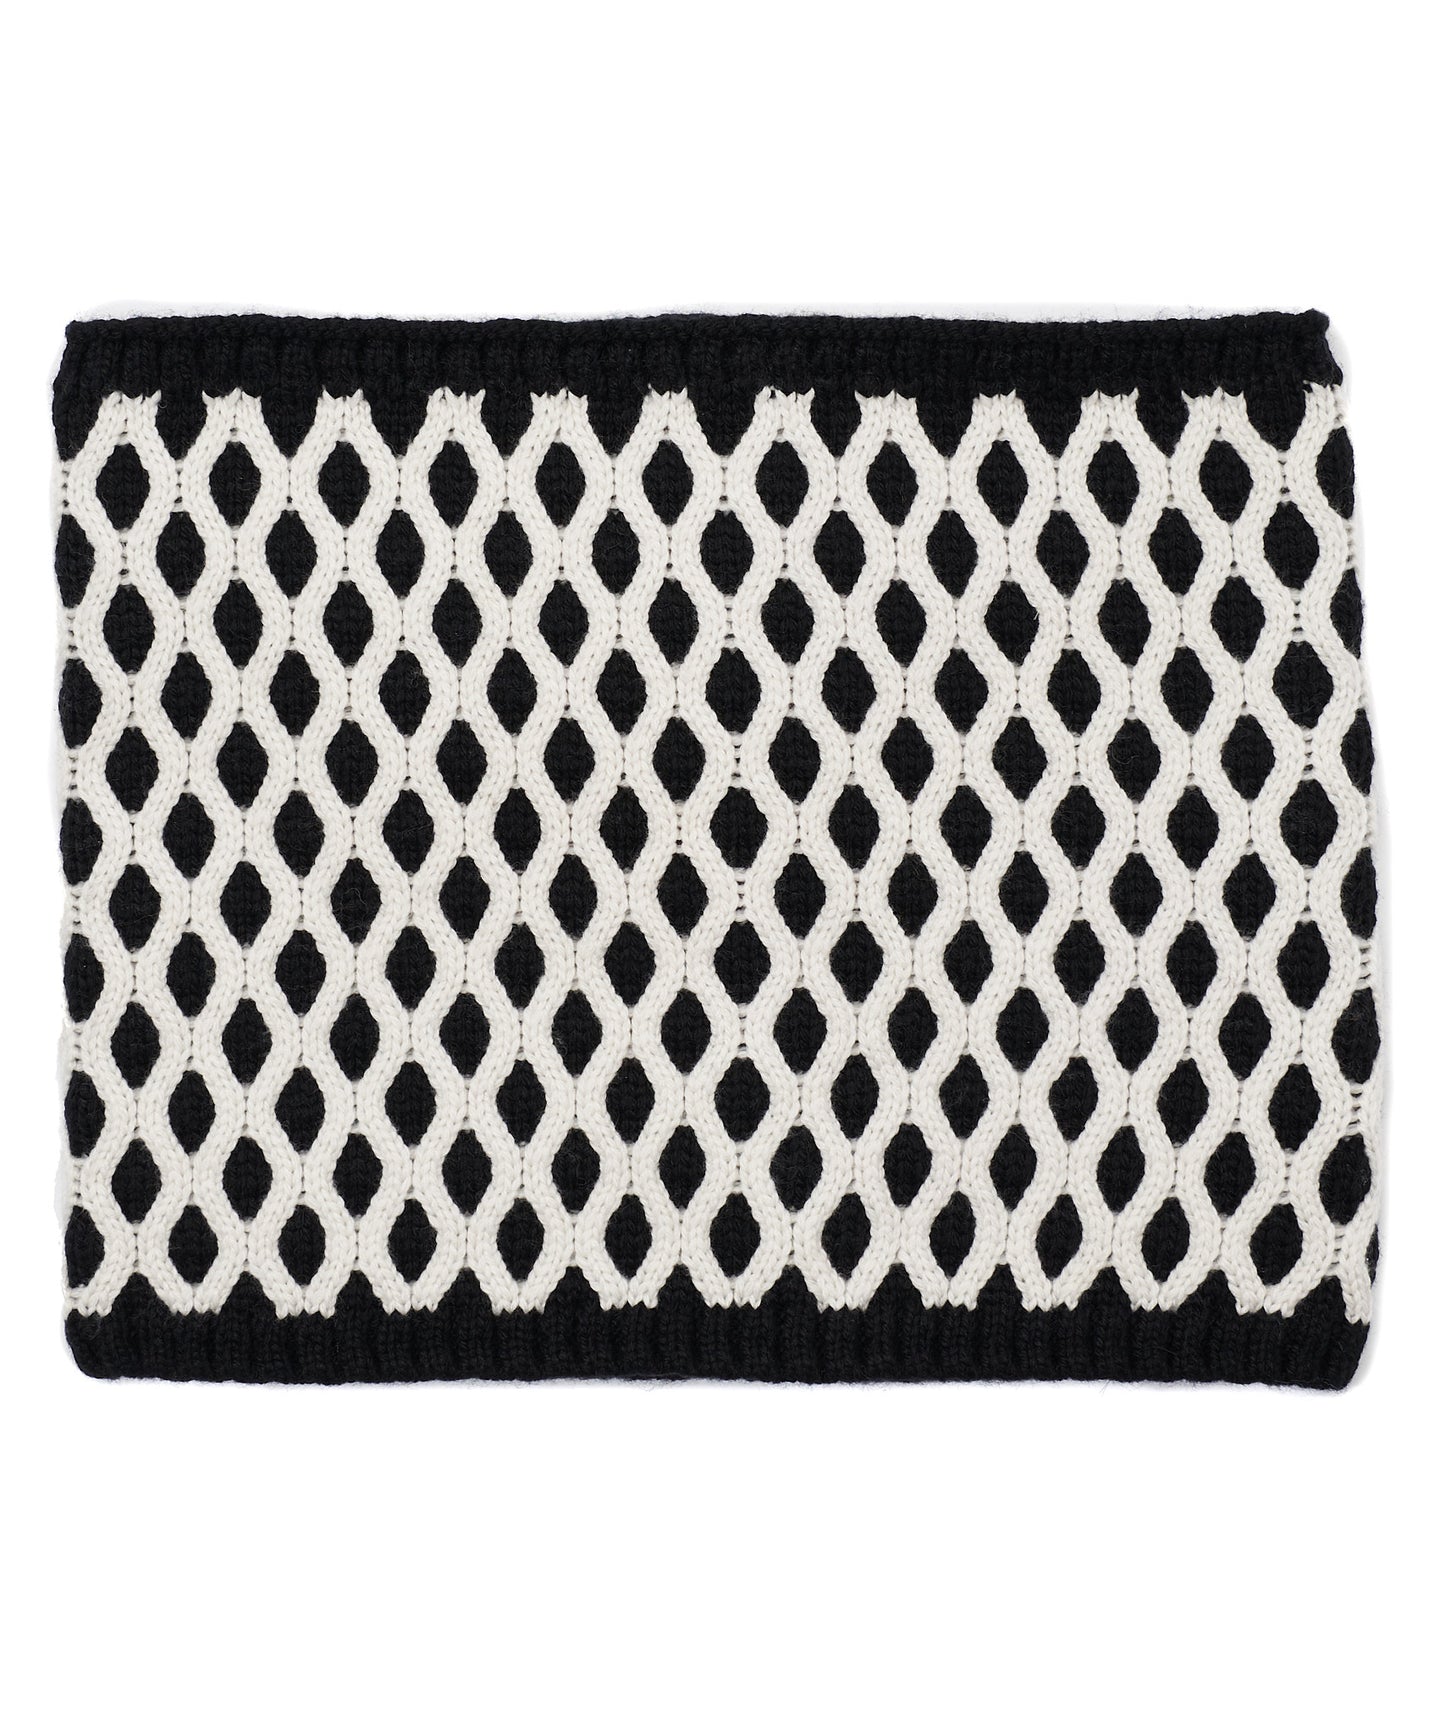 Recycled Bi-color Honeycomb Neck Warmer in color Black/White